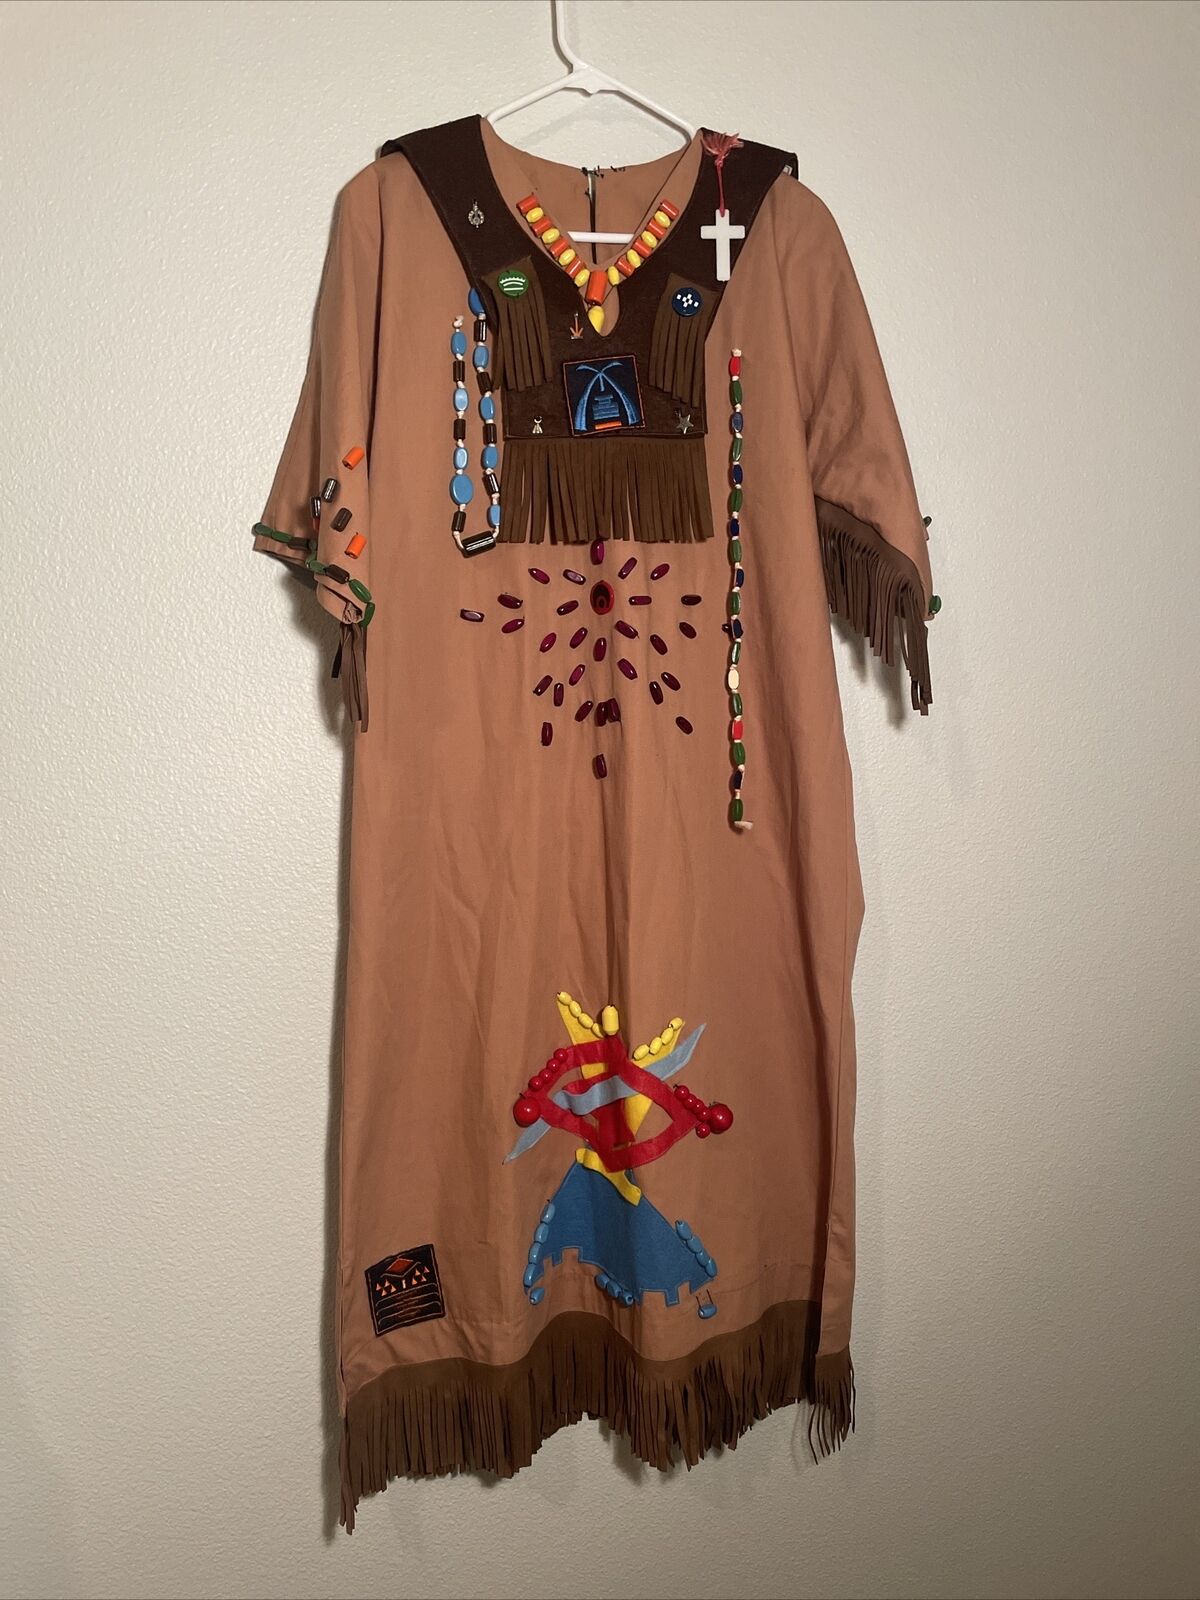 Vintage Camp Fire Girls Dress Ceremonial Indian Beadwork  Patches And Pins